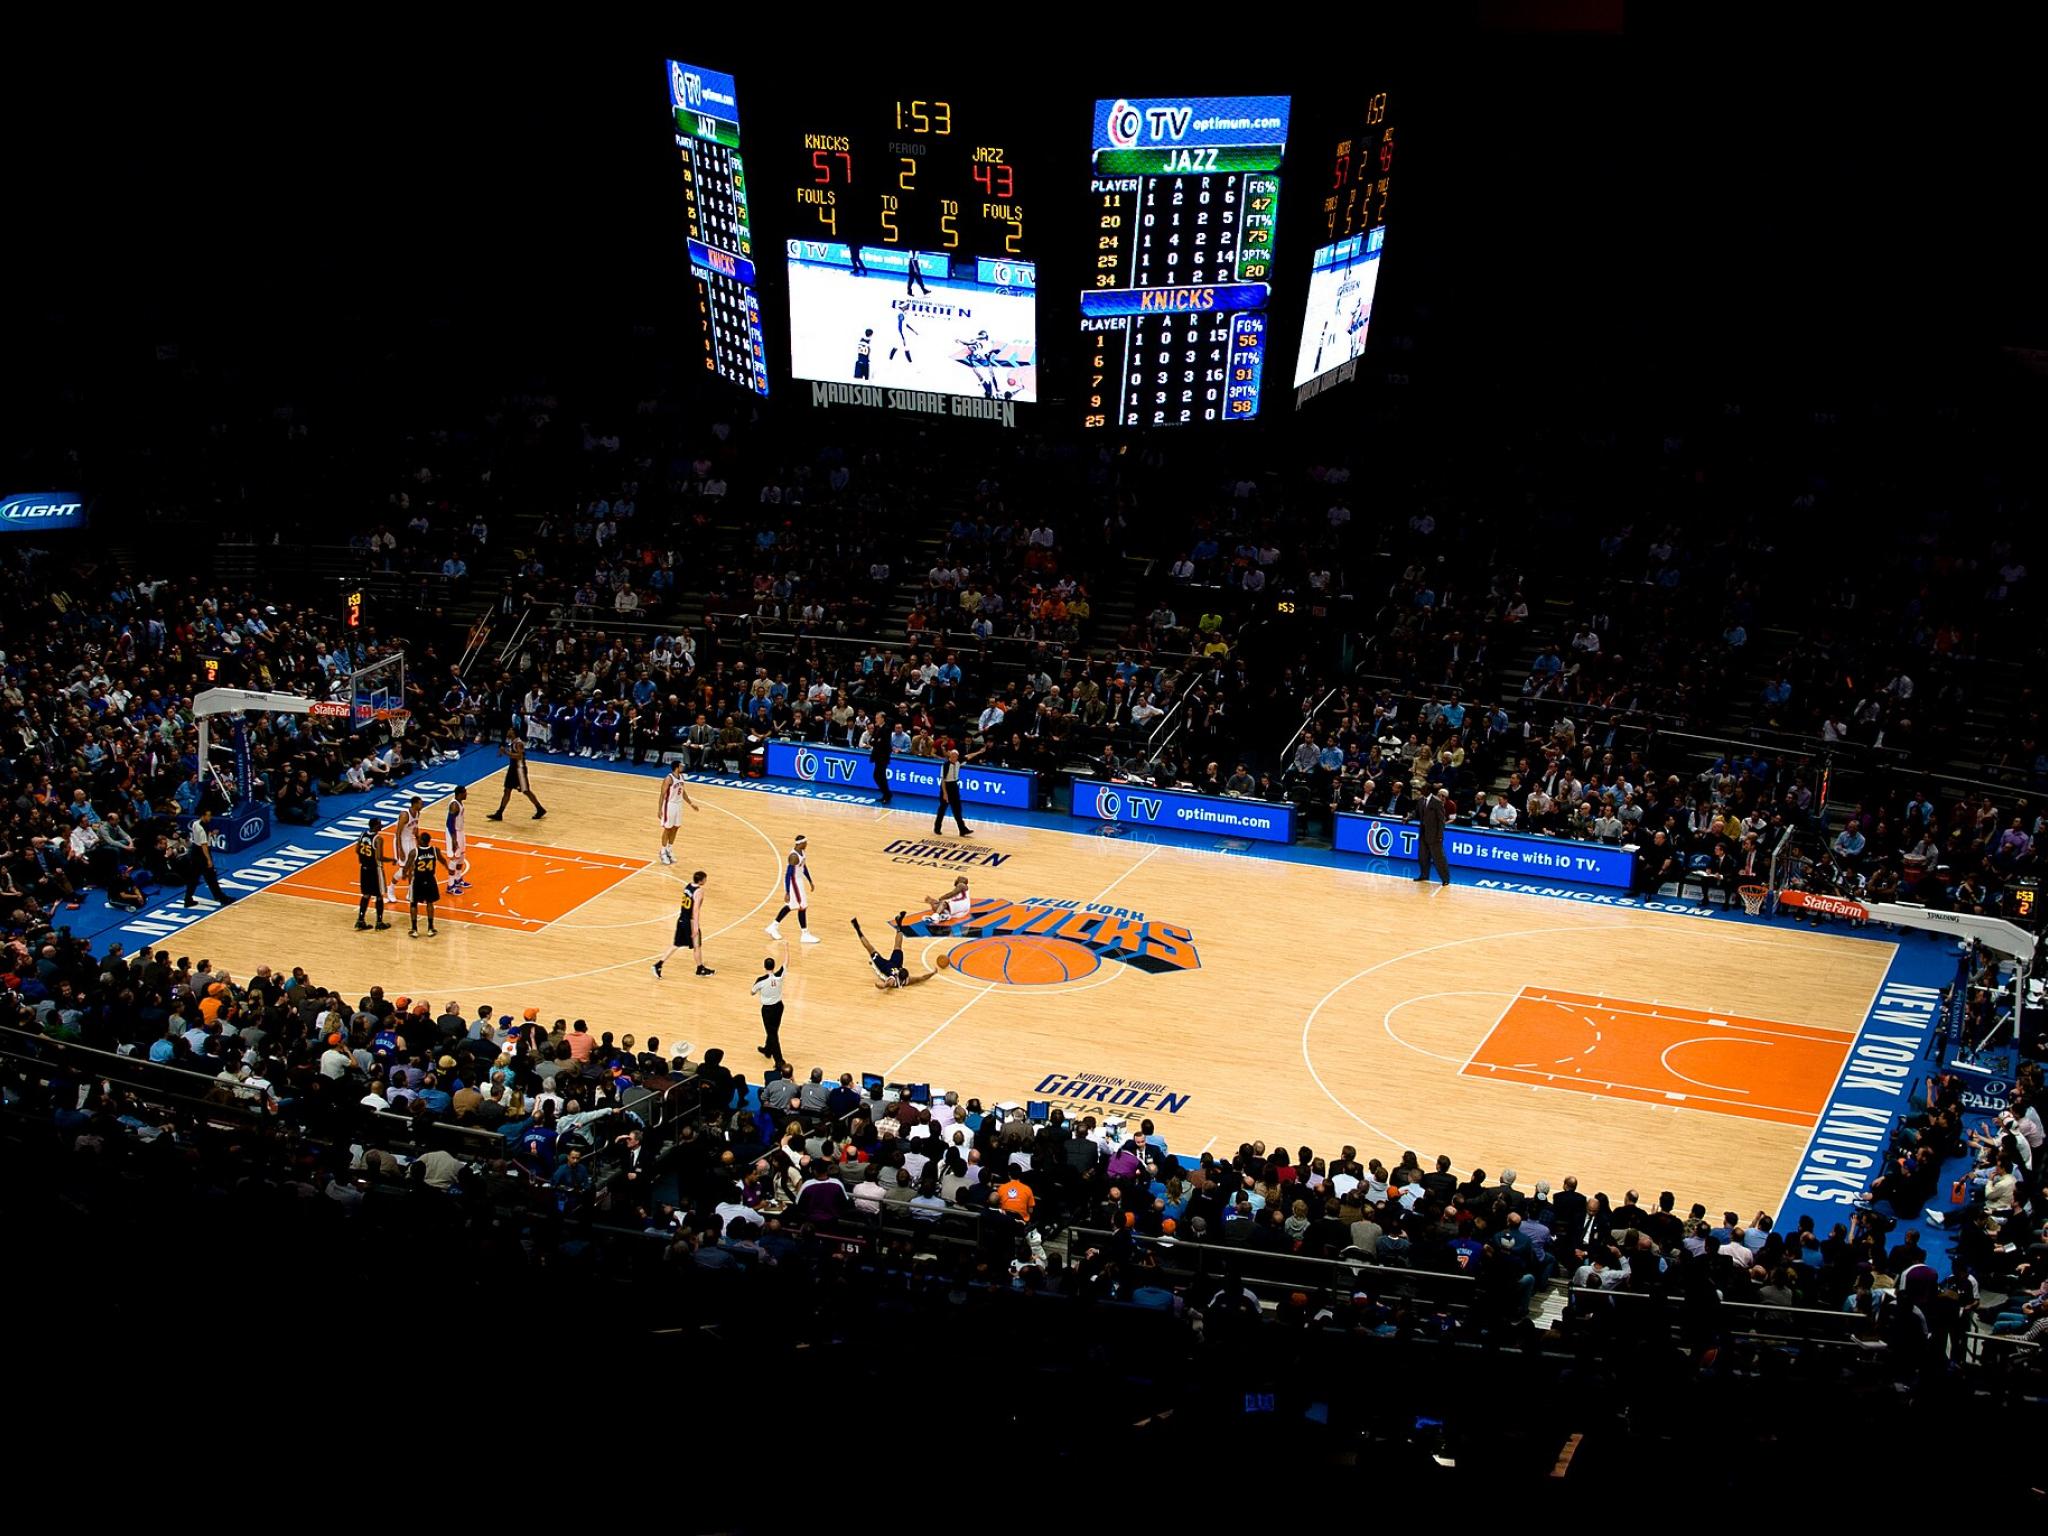  fewer-knicks-and-rangers-games---madison-square-garden-sports-revenue-and-bottomline-hit-in-q4 